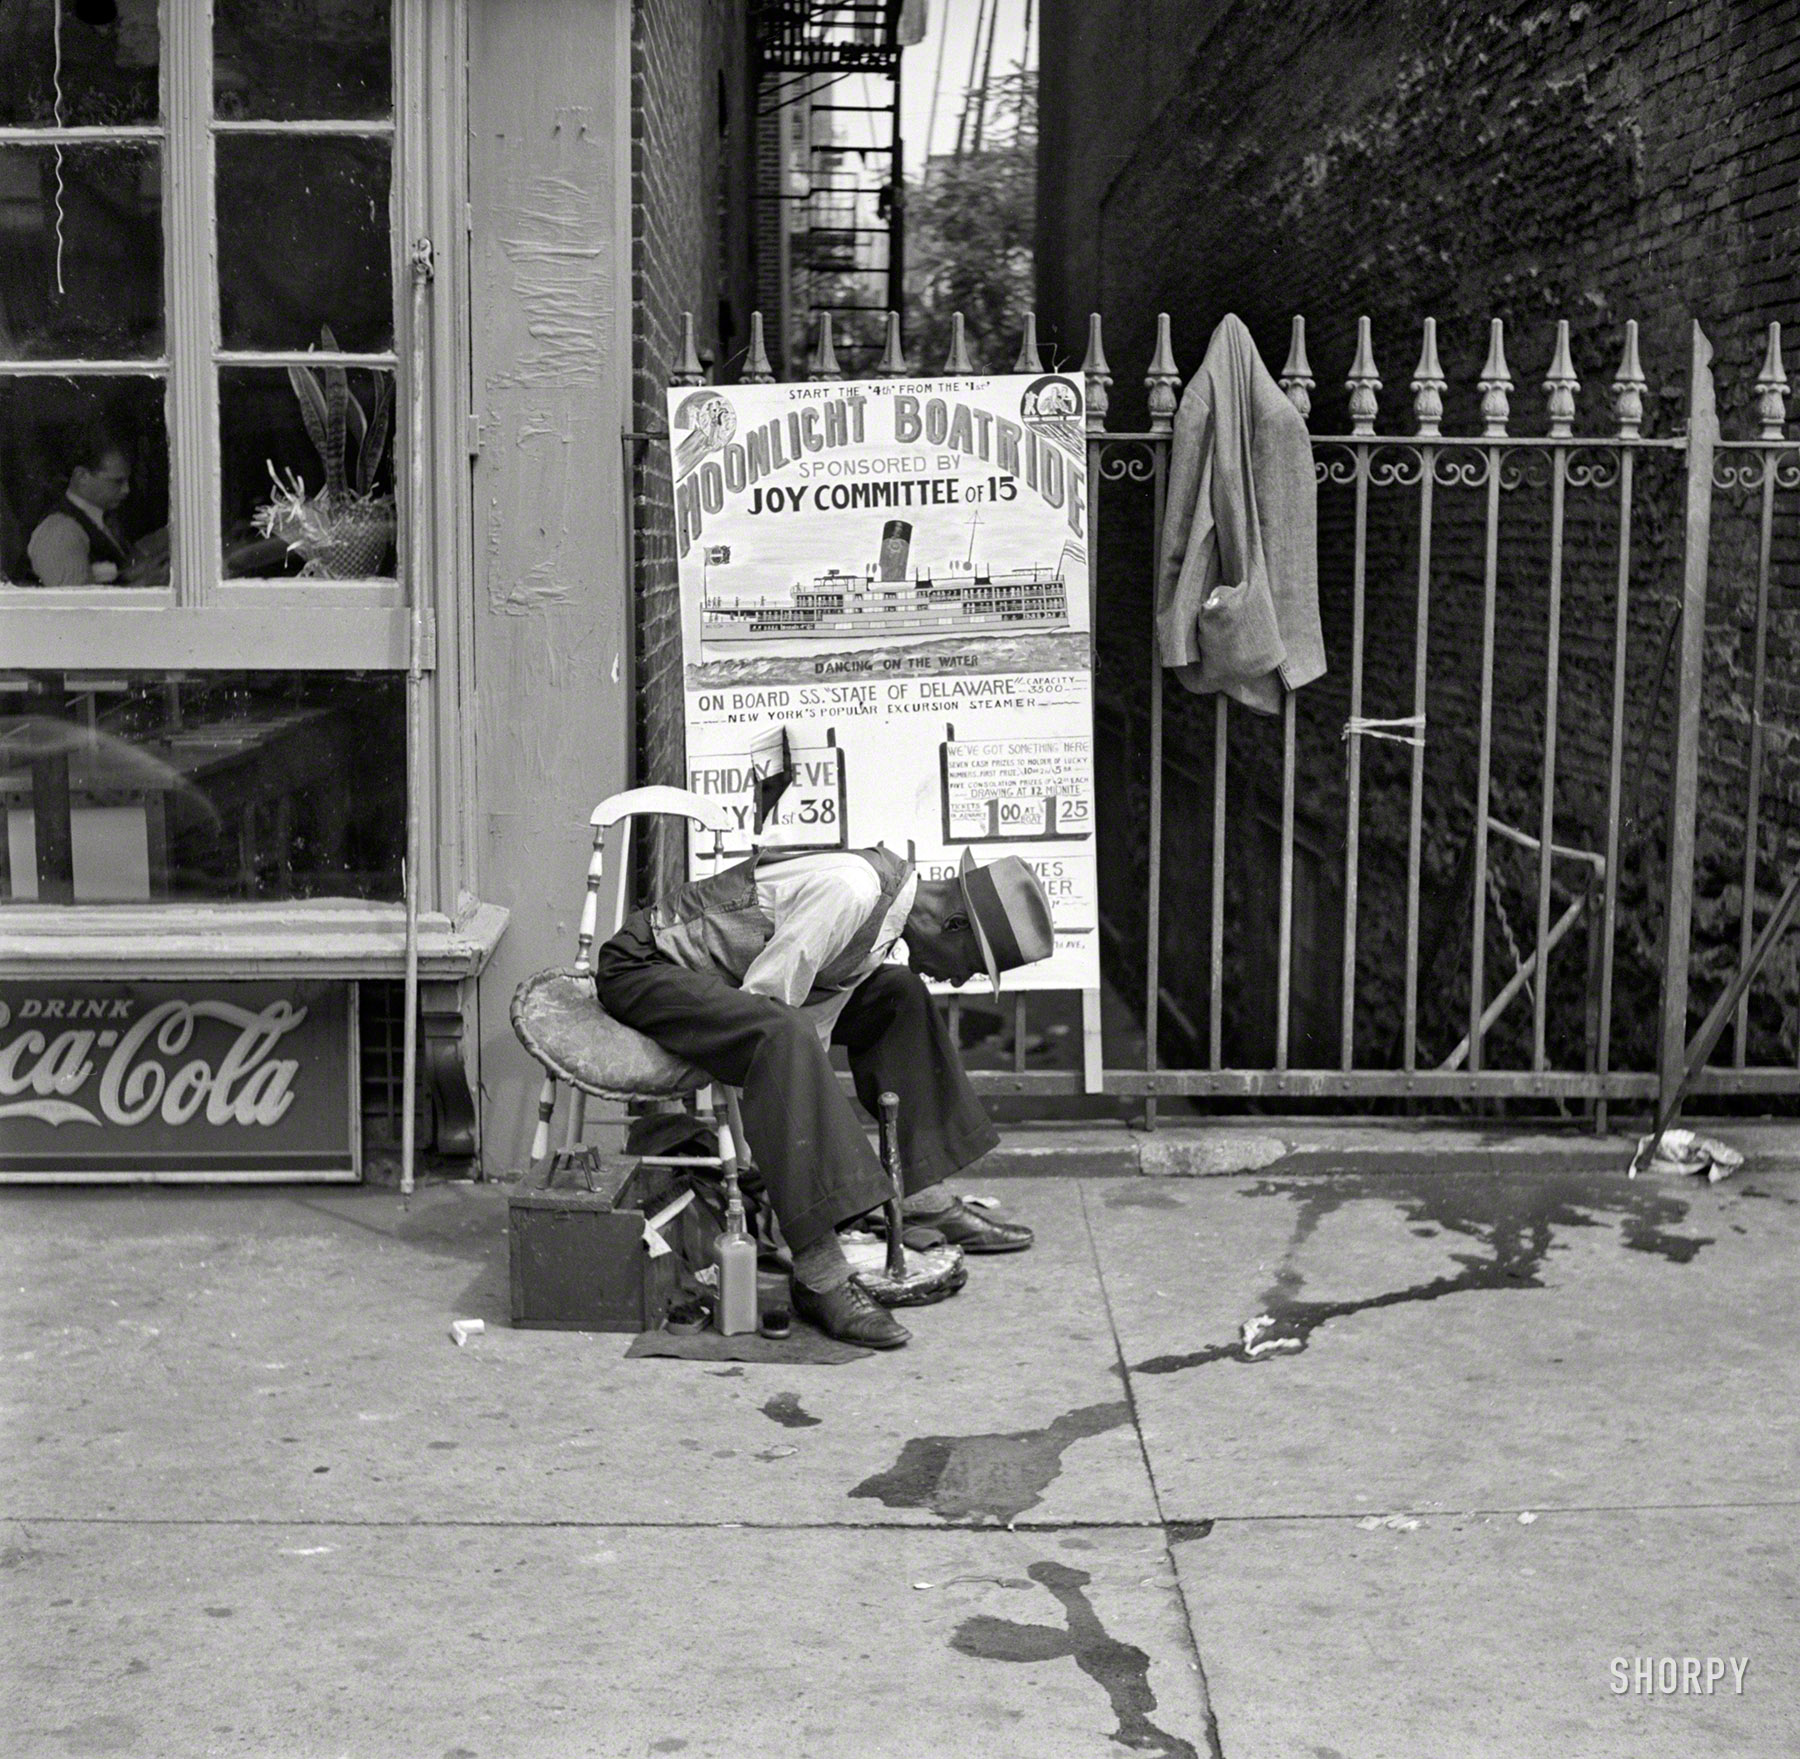 Summer 1938. "Street scene, New York." With your choice of refreshment, shiny shoes and "dancing on the water." Photo by Jack Allison. View full size.